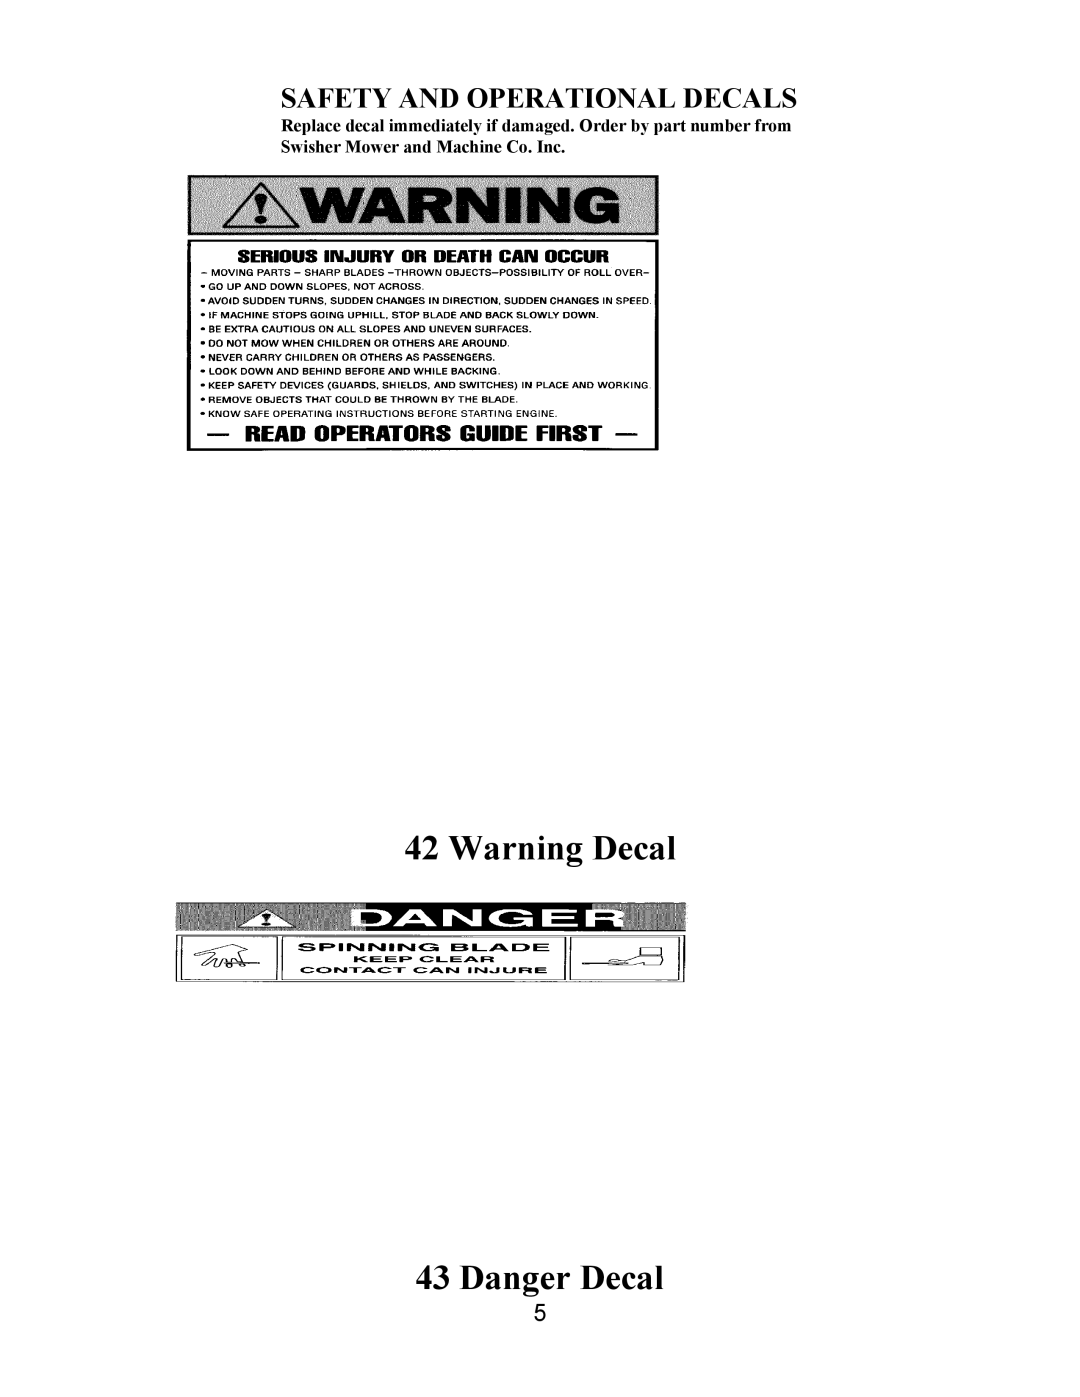 Swisher T1360 owner manual Warning Decal 43 Danger Decal, Safety And Operational Decals 